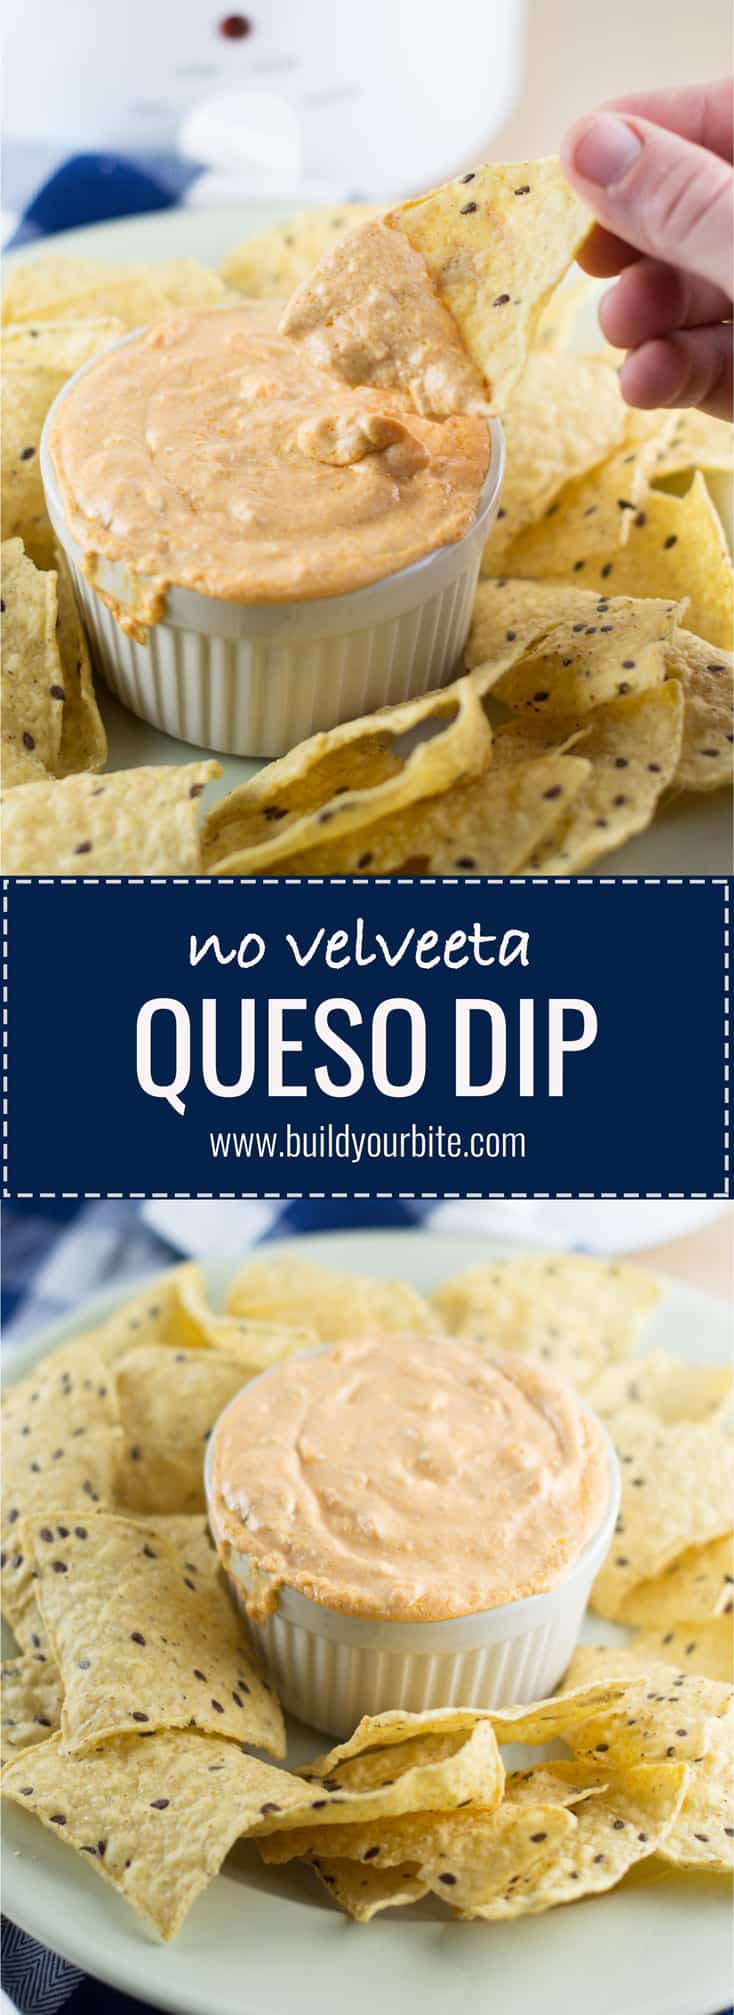 Healthier NO VELVEETA queso dip! This will be your game day favorite! #quesodip #quesonovelveeta #tailgatingfood #appetizers